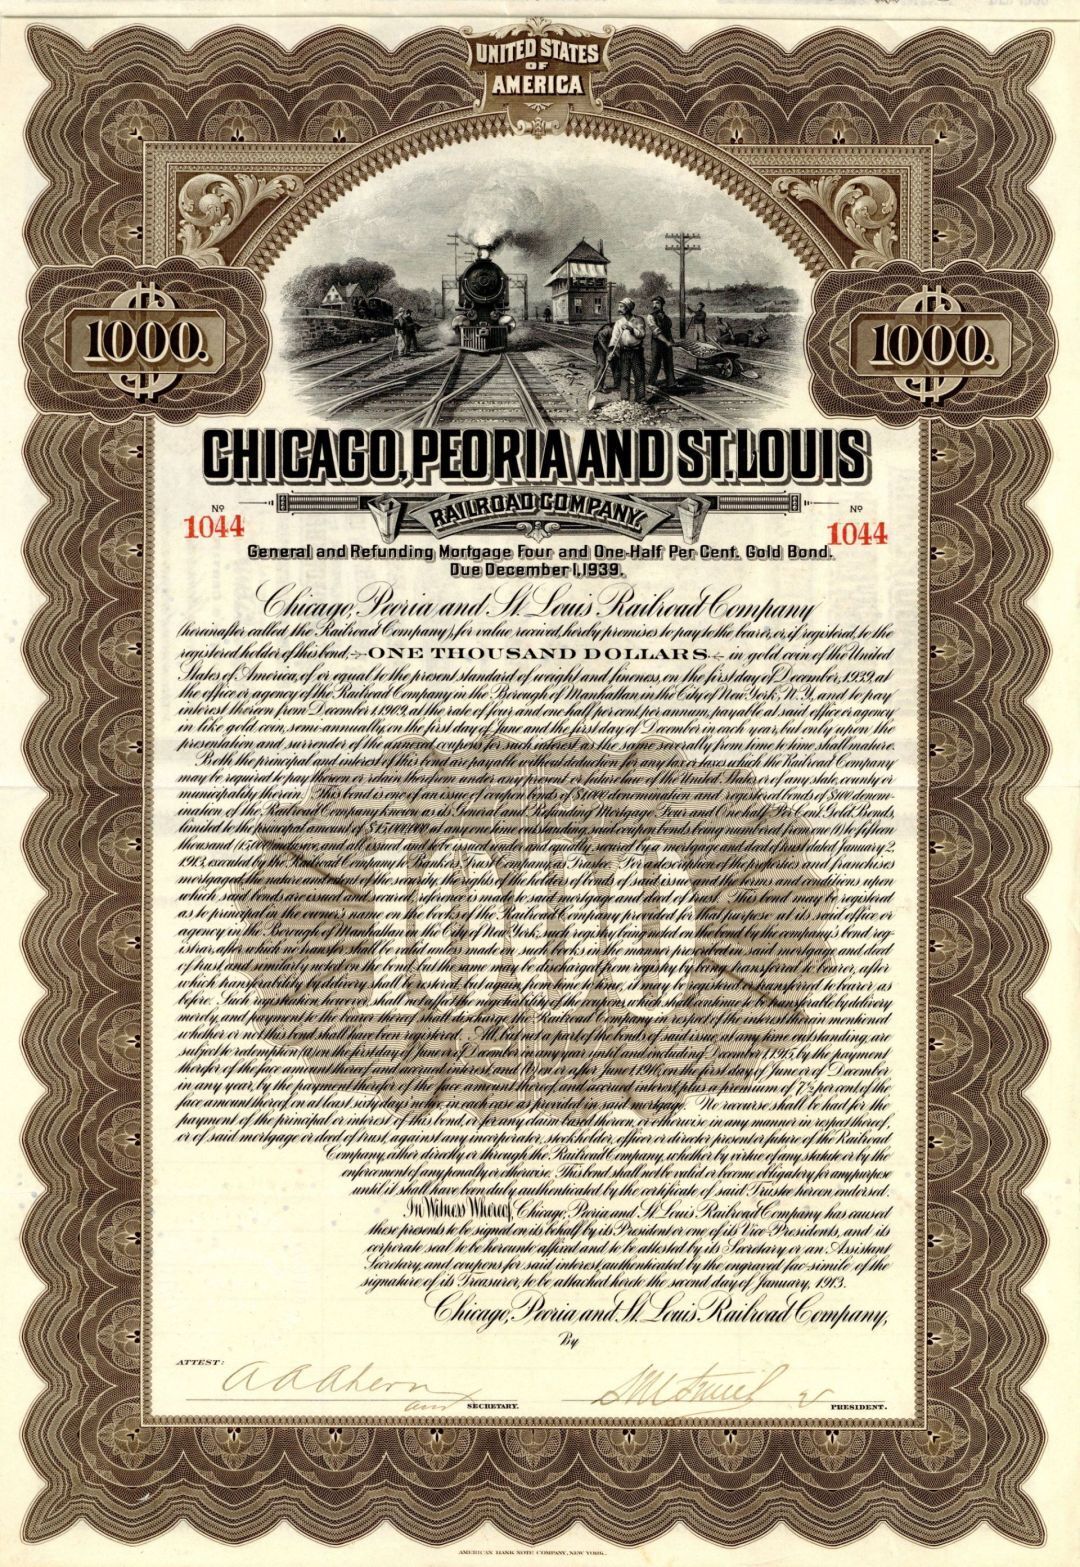 Chicago, Peoria and St. Louis Railroad Co. - $1,000 Bond dated 1913 - Railroad B